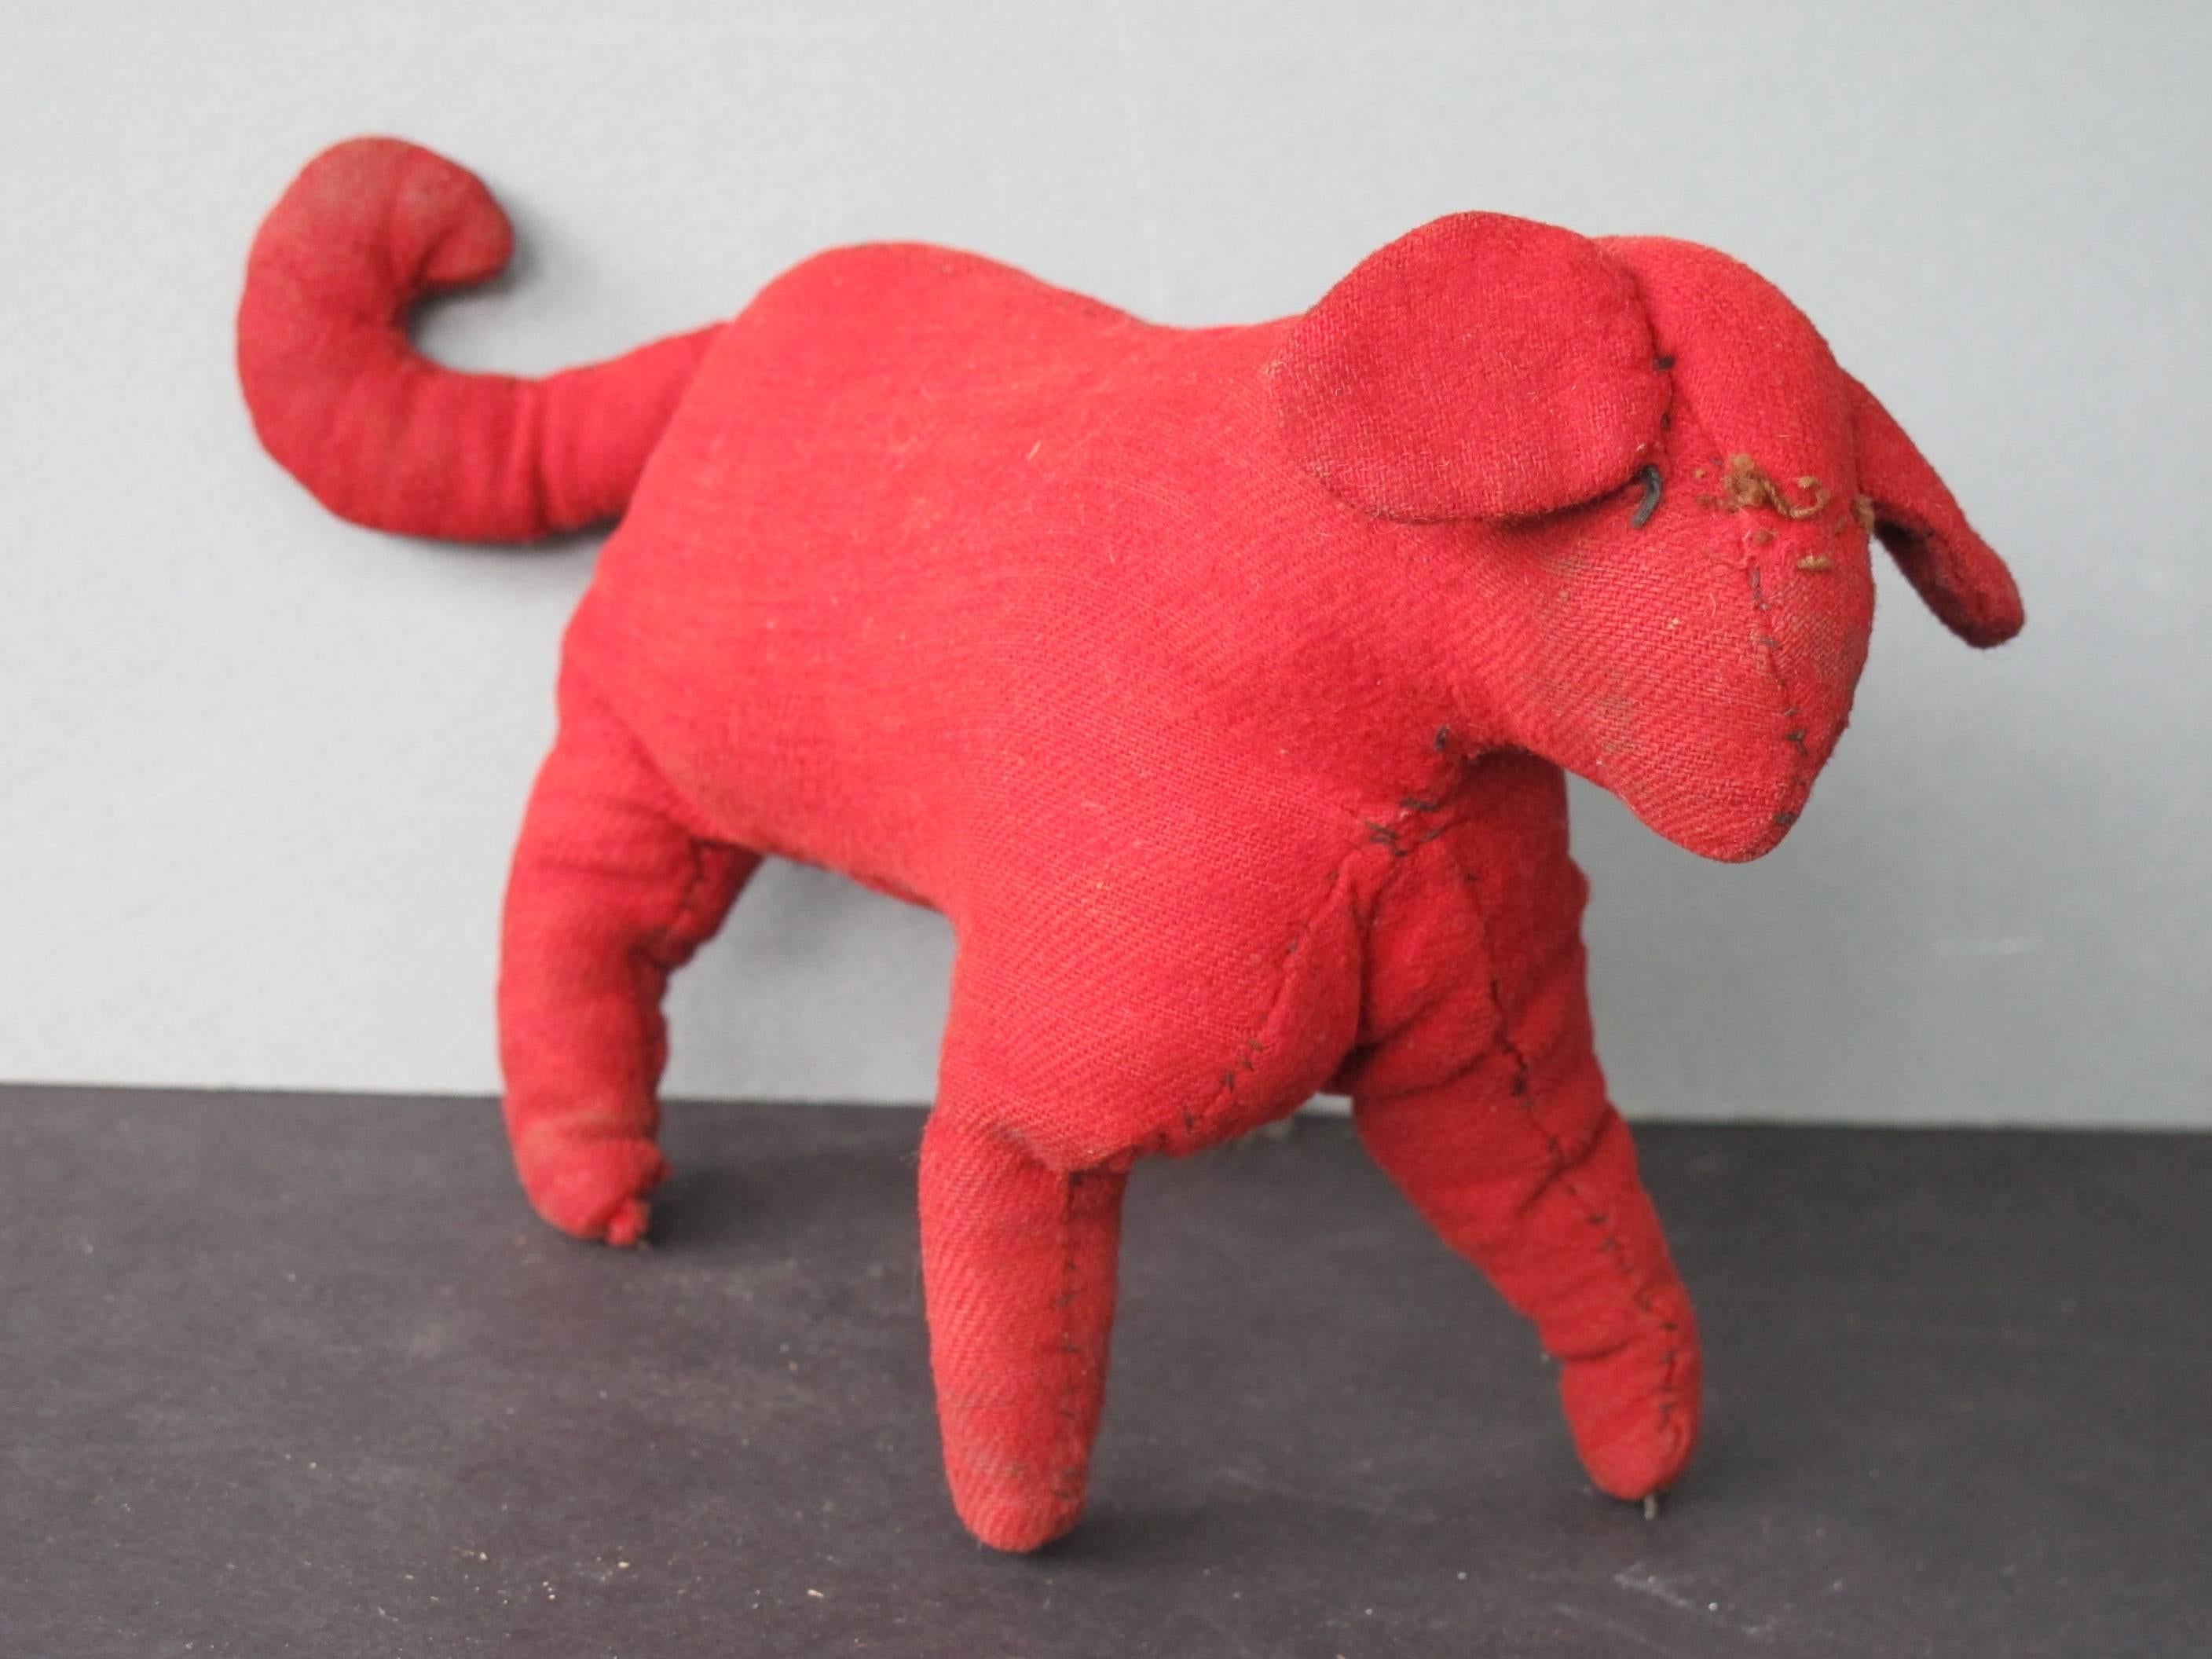 Child's soft dog sewn of soft red fabric with stitched face and floppy ears and curled tail. Homemade animal toys were beautifully made in rural America especially among the Pennsylvania Amish and Mennonites.